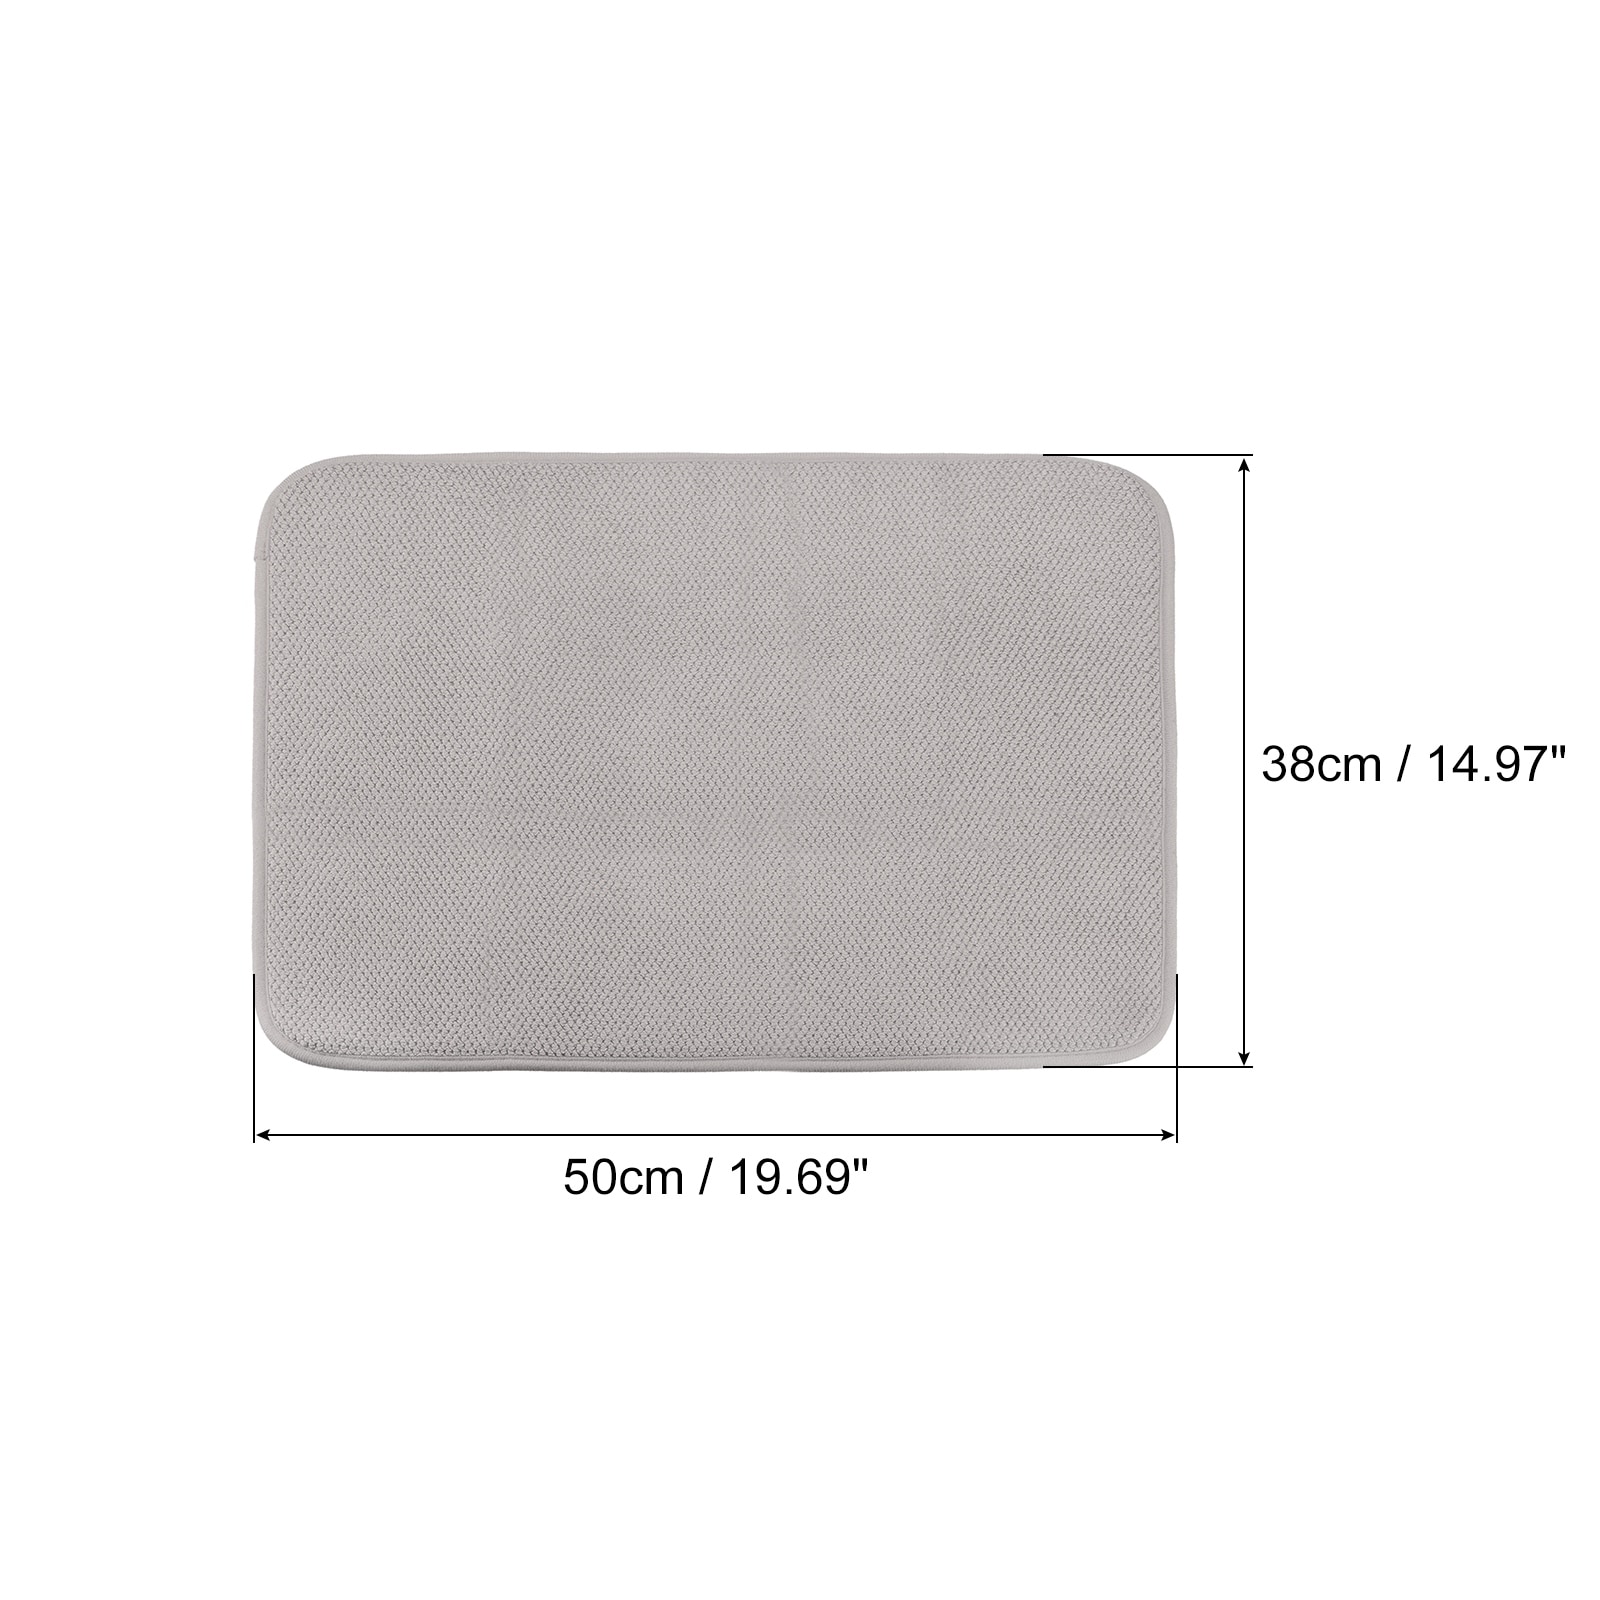 https://ak1.ostkcdn.com/images/products/is/images/direct/ff0a6970f3ca67d4acb751170ae694b5898e32cc/3pcs-Microfibre-Dish-Drying-Mat-Kitchen-Absorbent-Dish-Drainer-Mat-Red.jpg